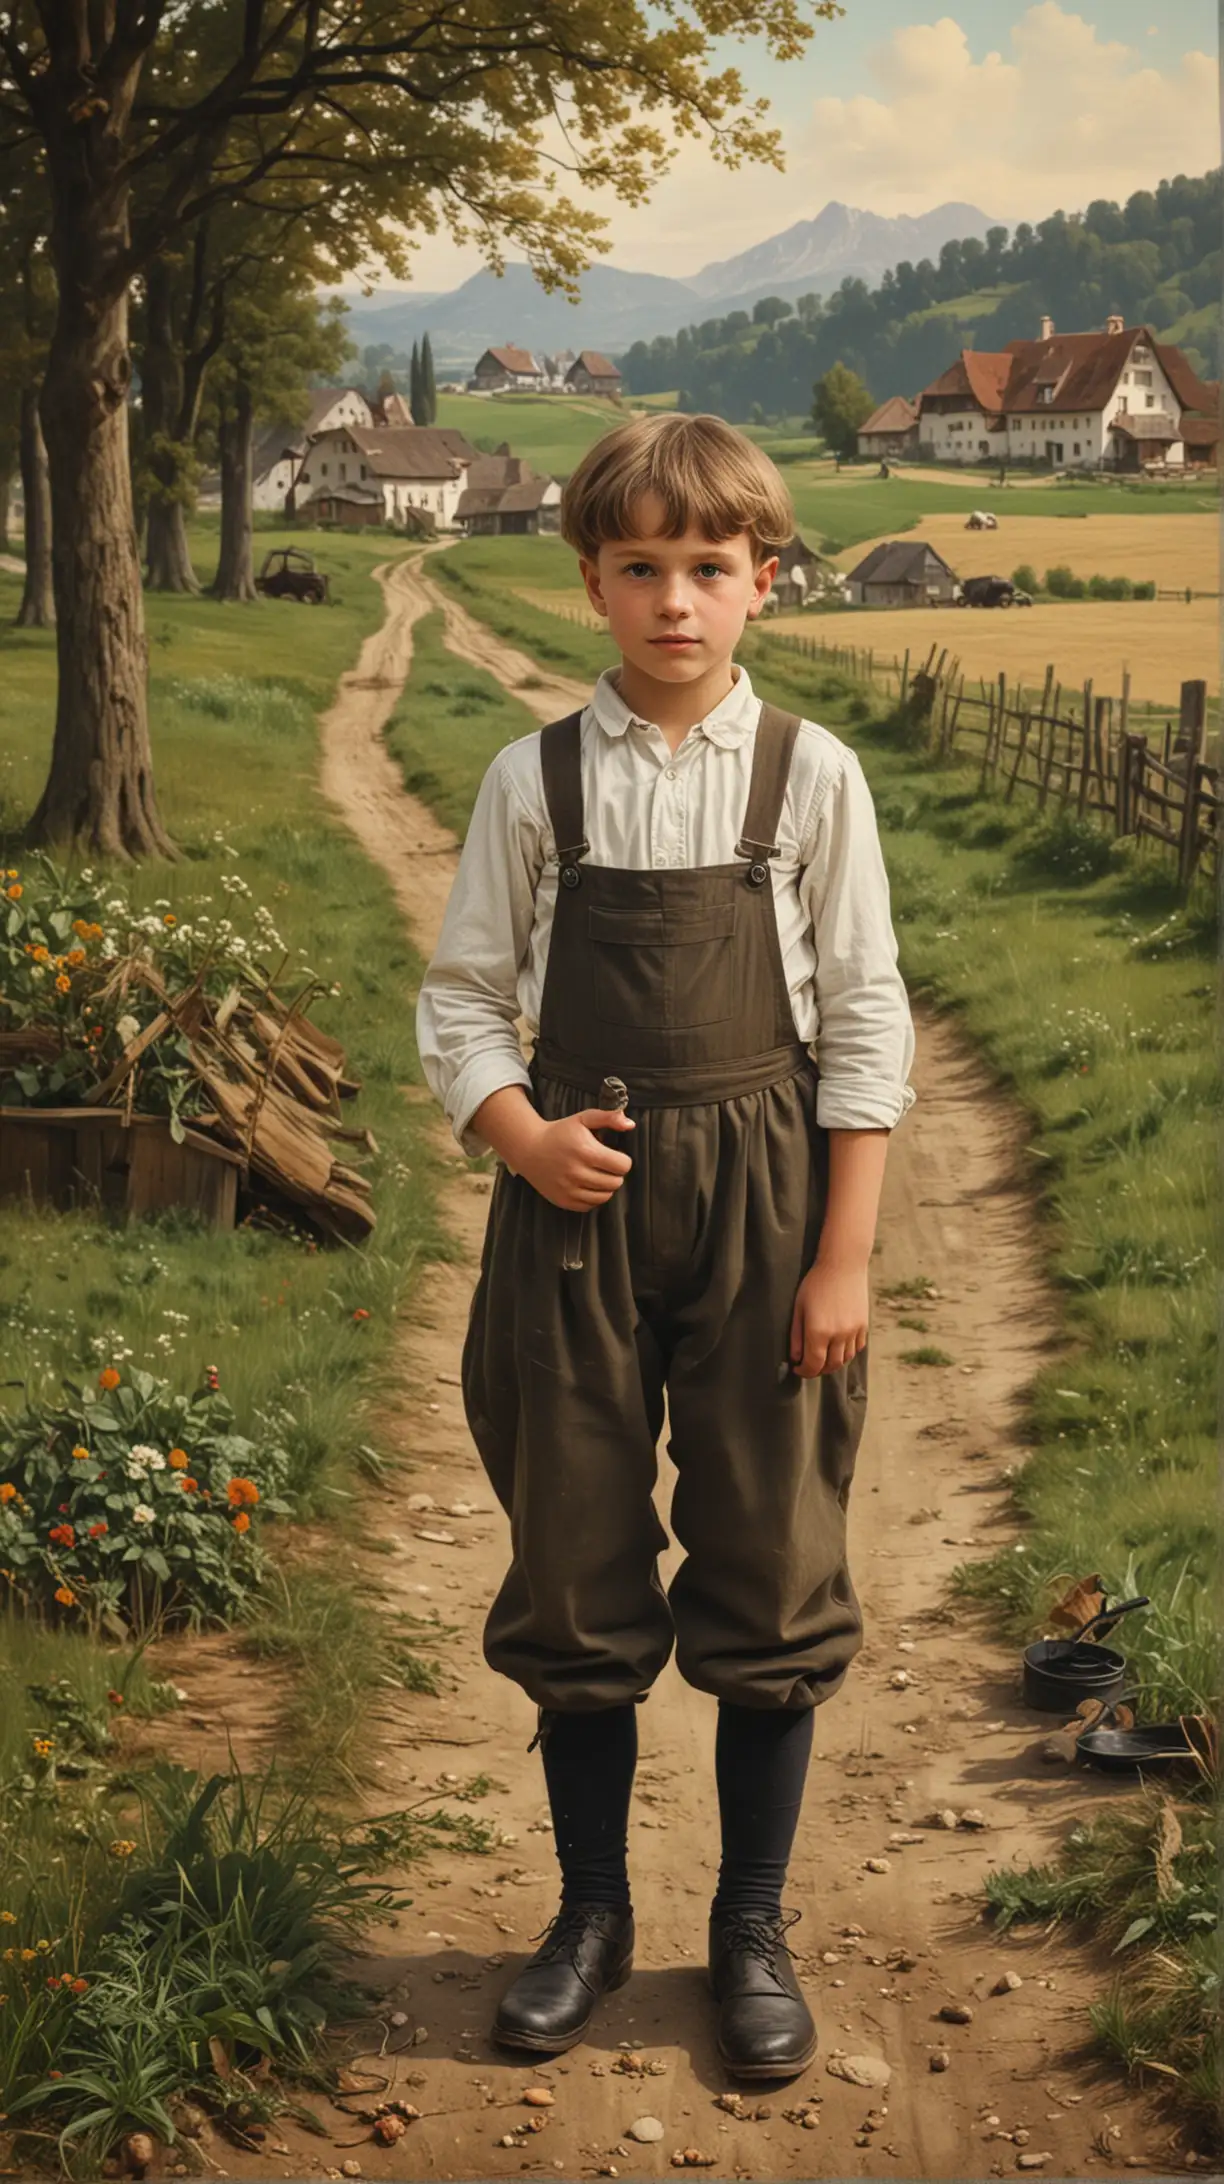 Early Life: Create an image depicting Franz Jägerstätter's childhood in the Austrian countryside, perhaps working on his family's farm.